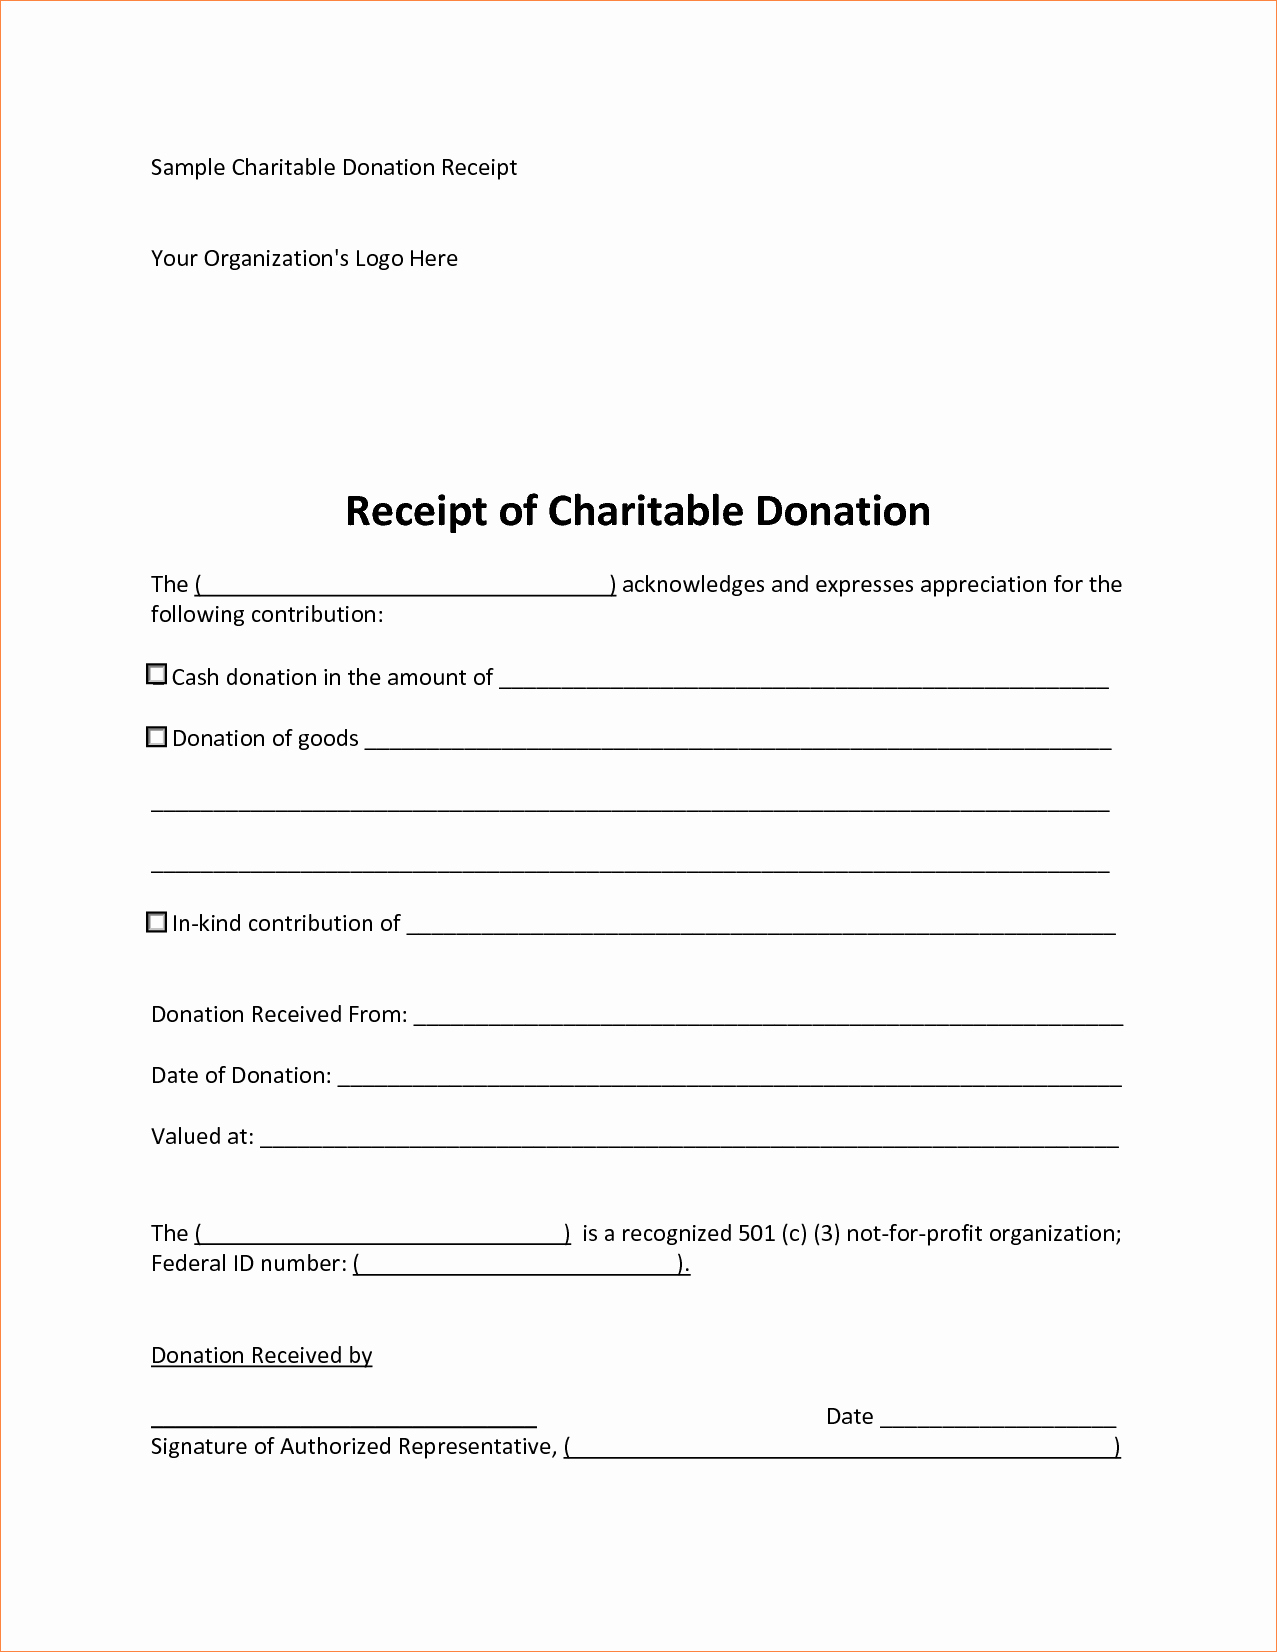 Charitable Contribution Receipt Template Best Of 5 Sample Donation Receipt